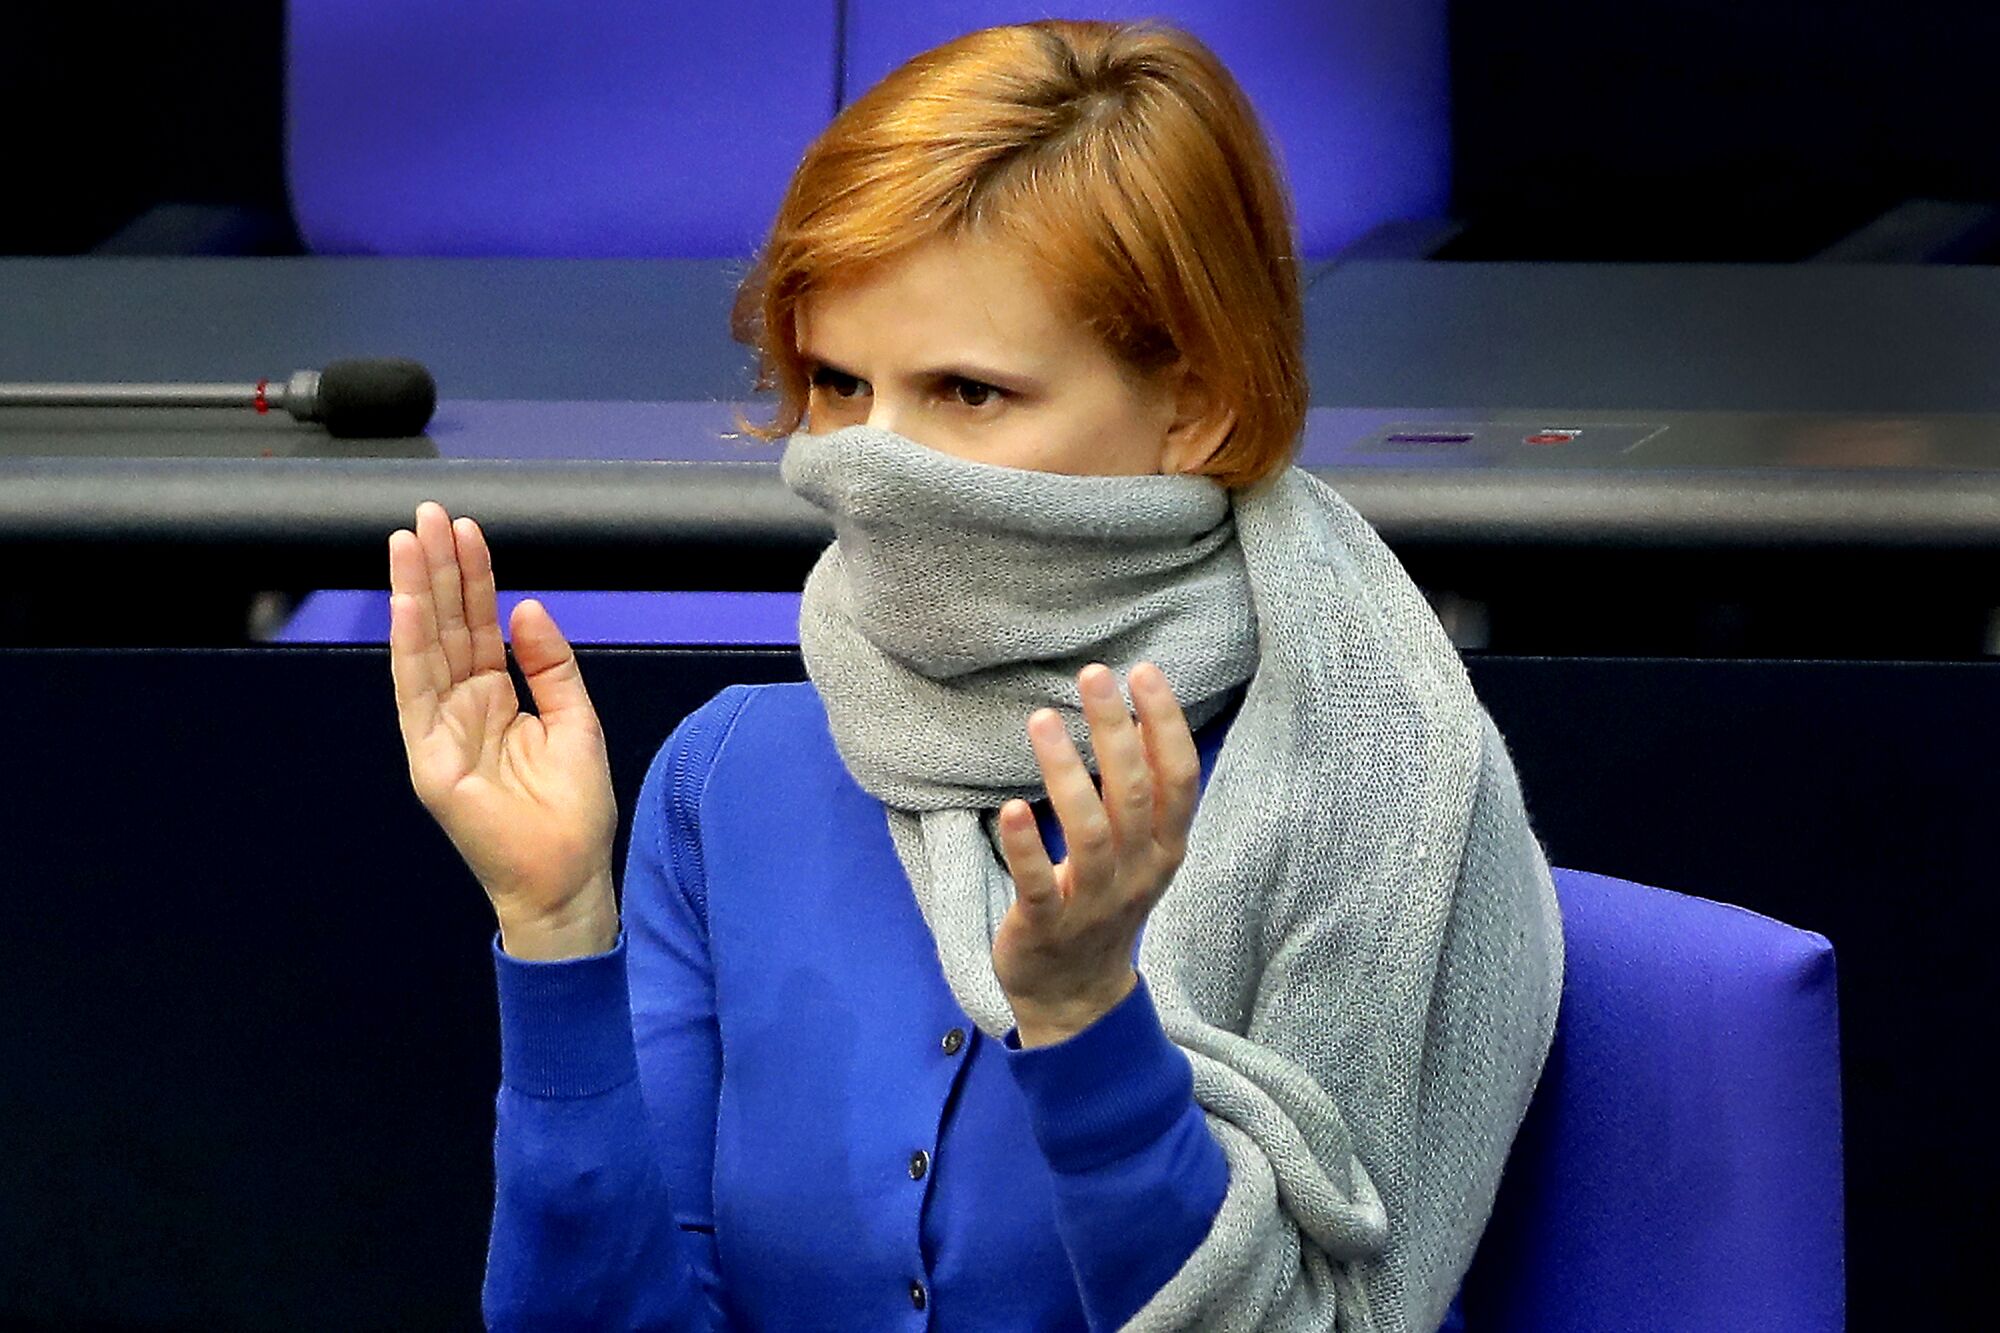 GERMANY: Katja Kipping, co-chairwoman of the German Left Party, wears a scarf as a face mask during a meeting of the German federal parliament, the Bundestag, at the Reichstag building in Berlin.